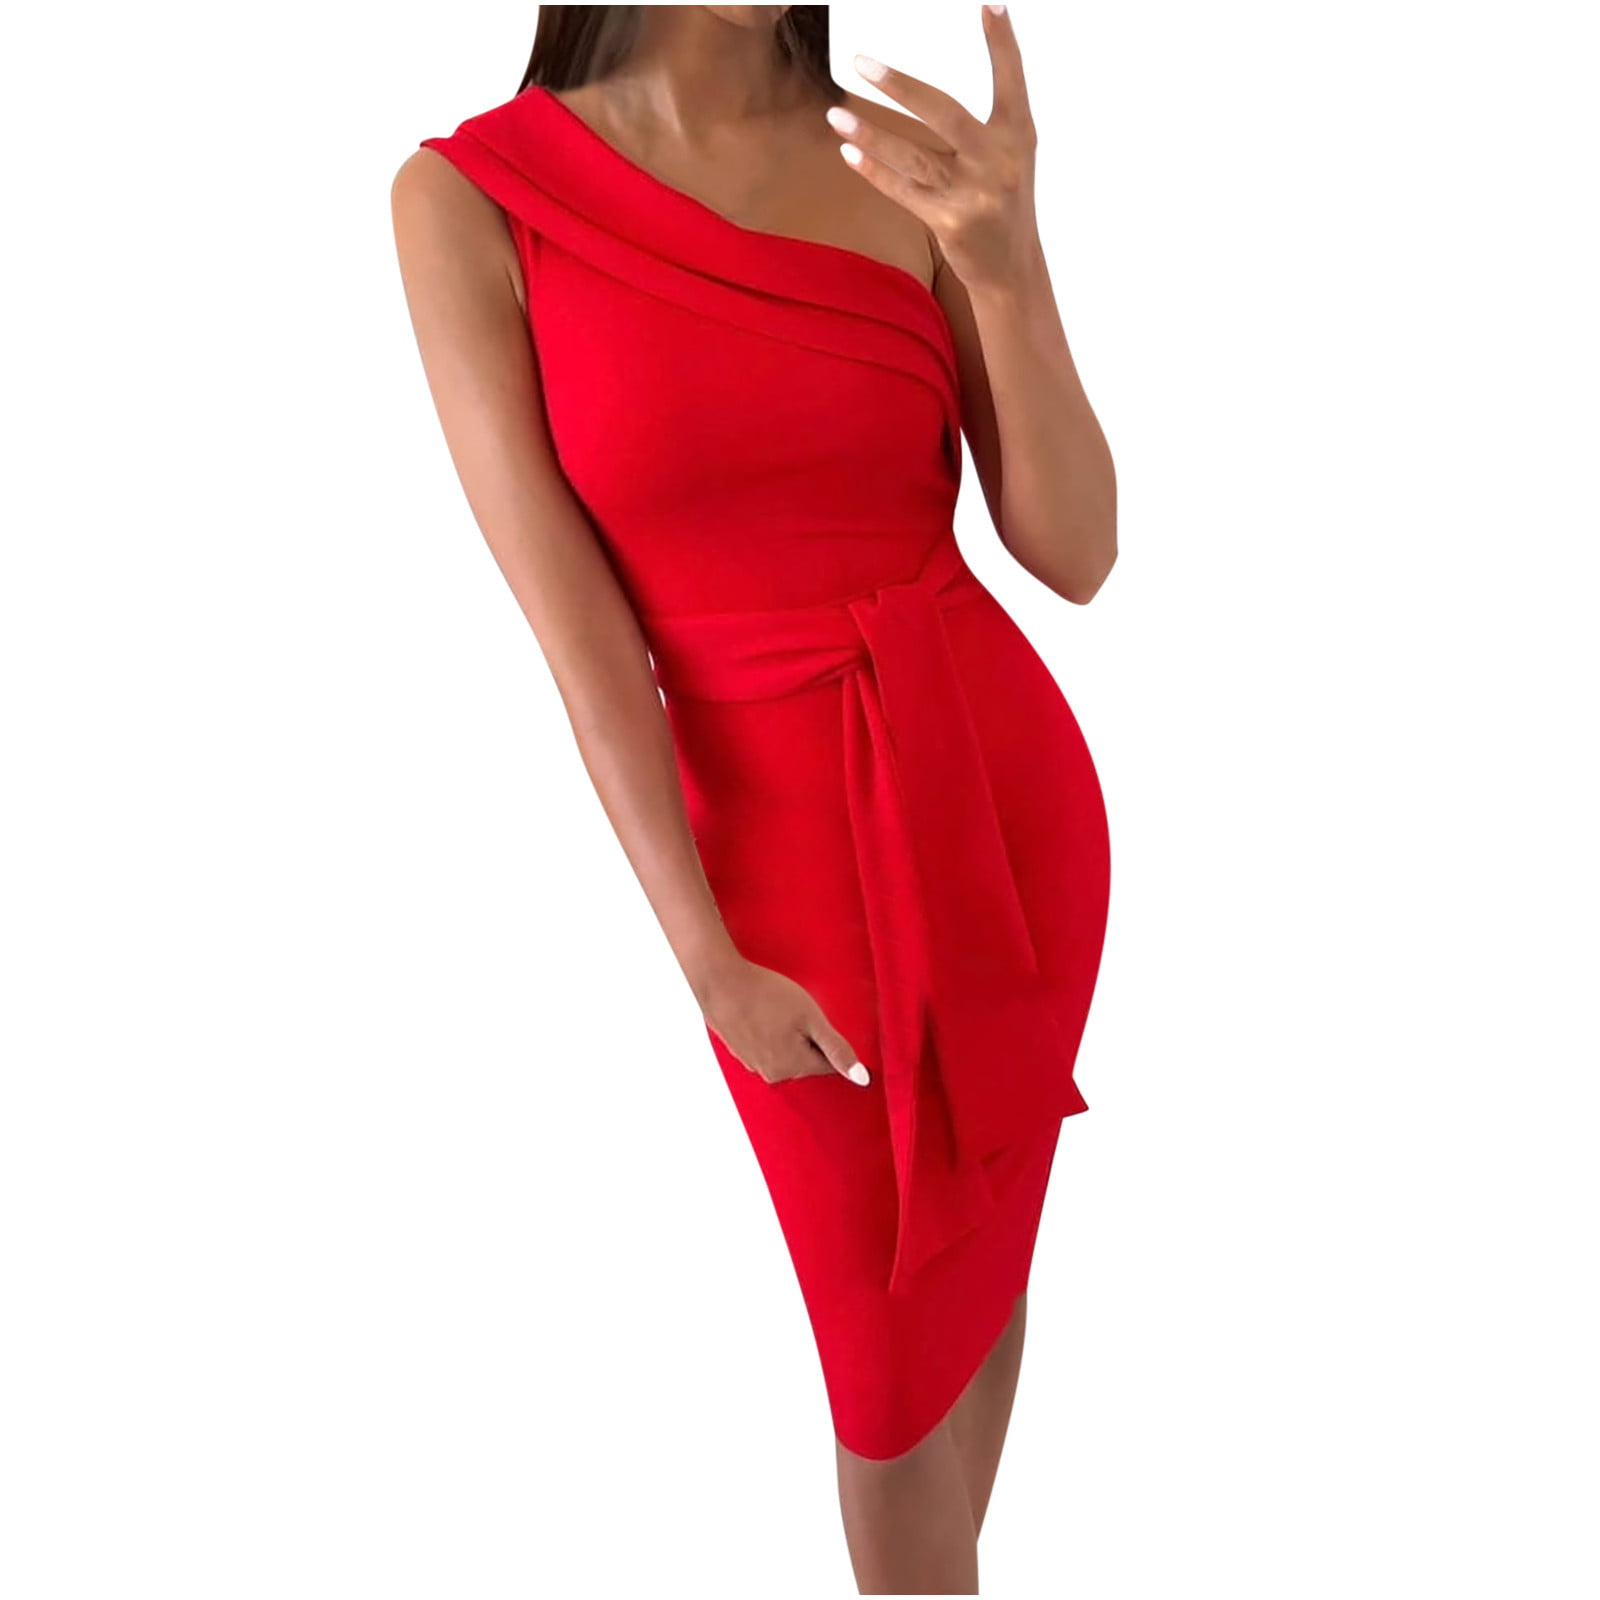 ⭐Women Summer One Shoulder Bodycon Dress Cocktail Party Casual Work Midi Dresses 